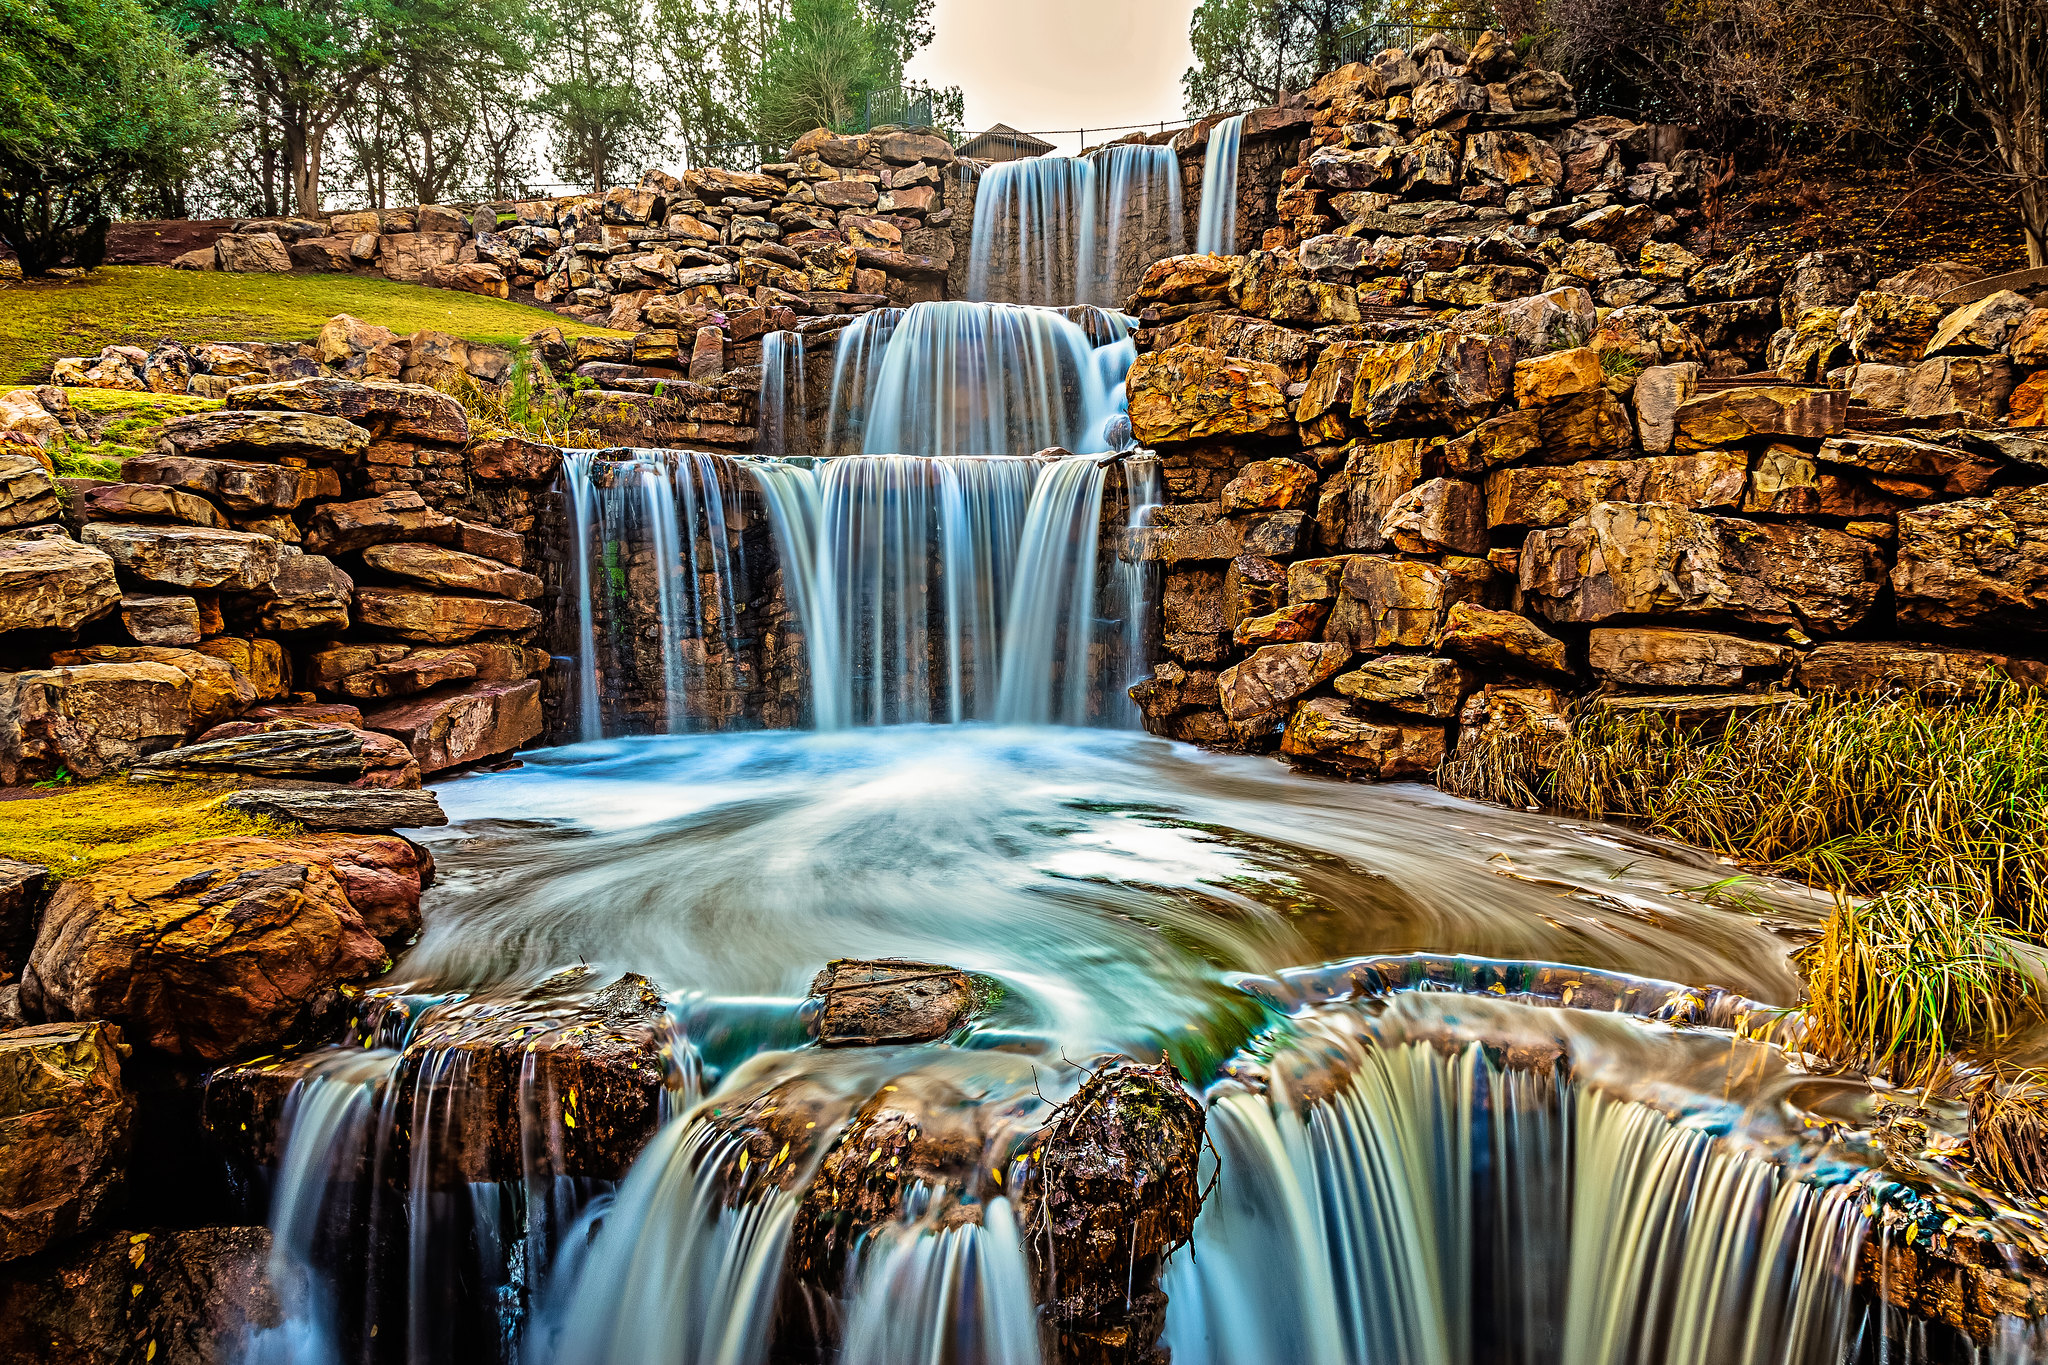 Triple Waterfall At Lucy Park In Wichita Falls Texas 9417